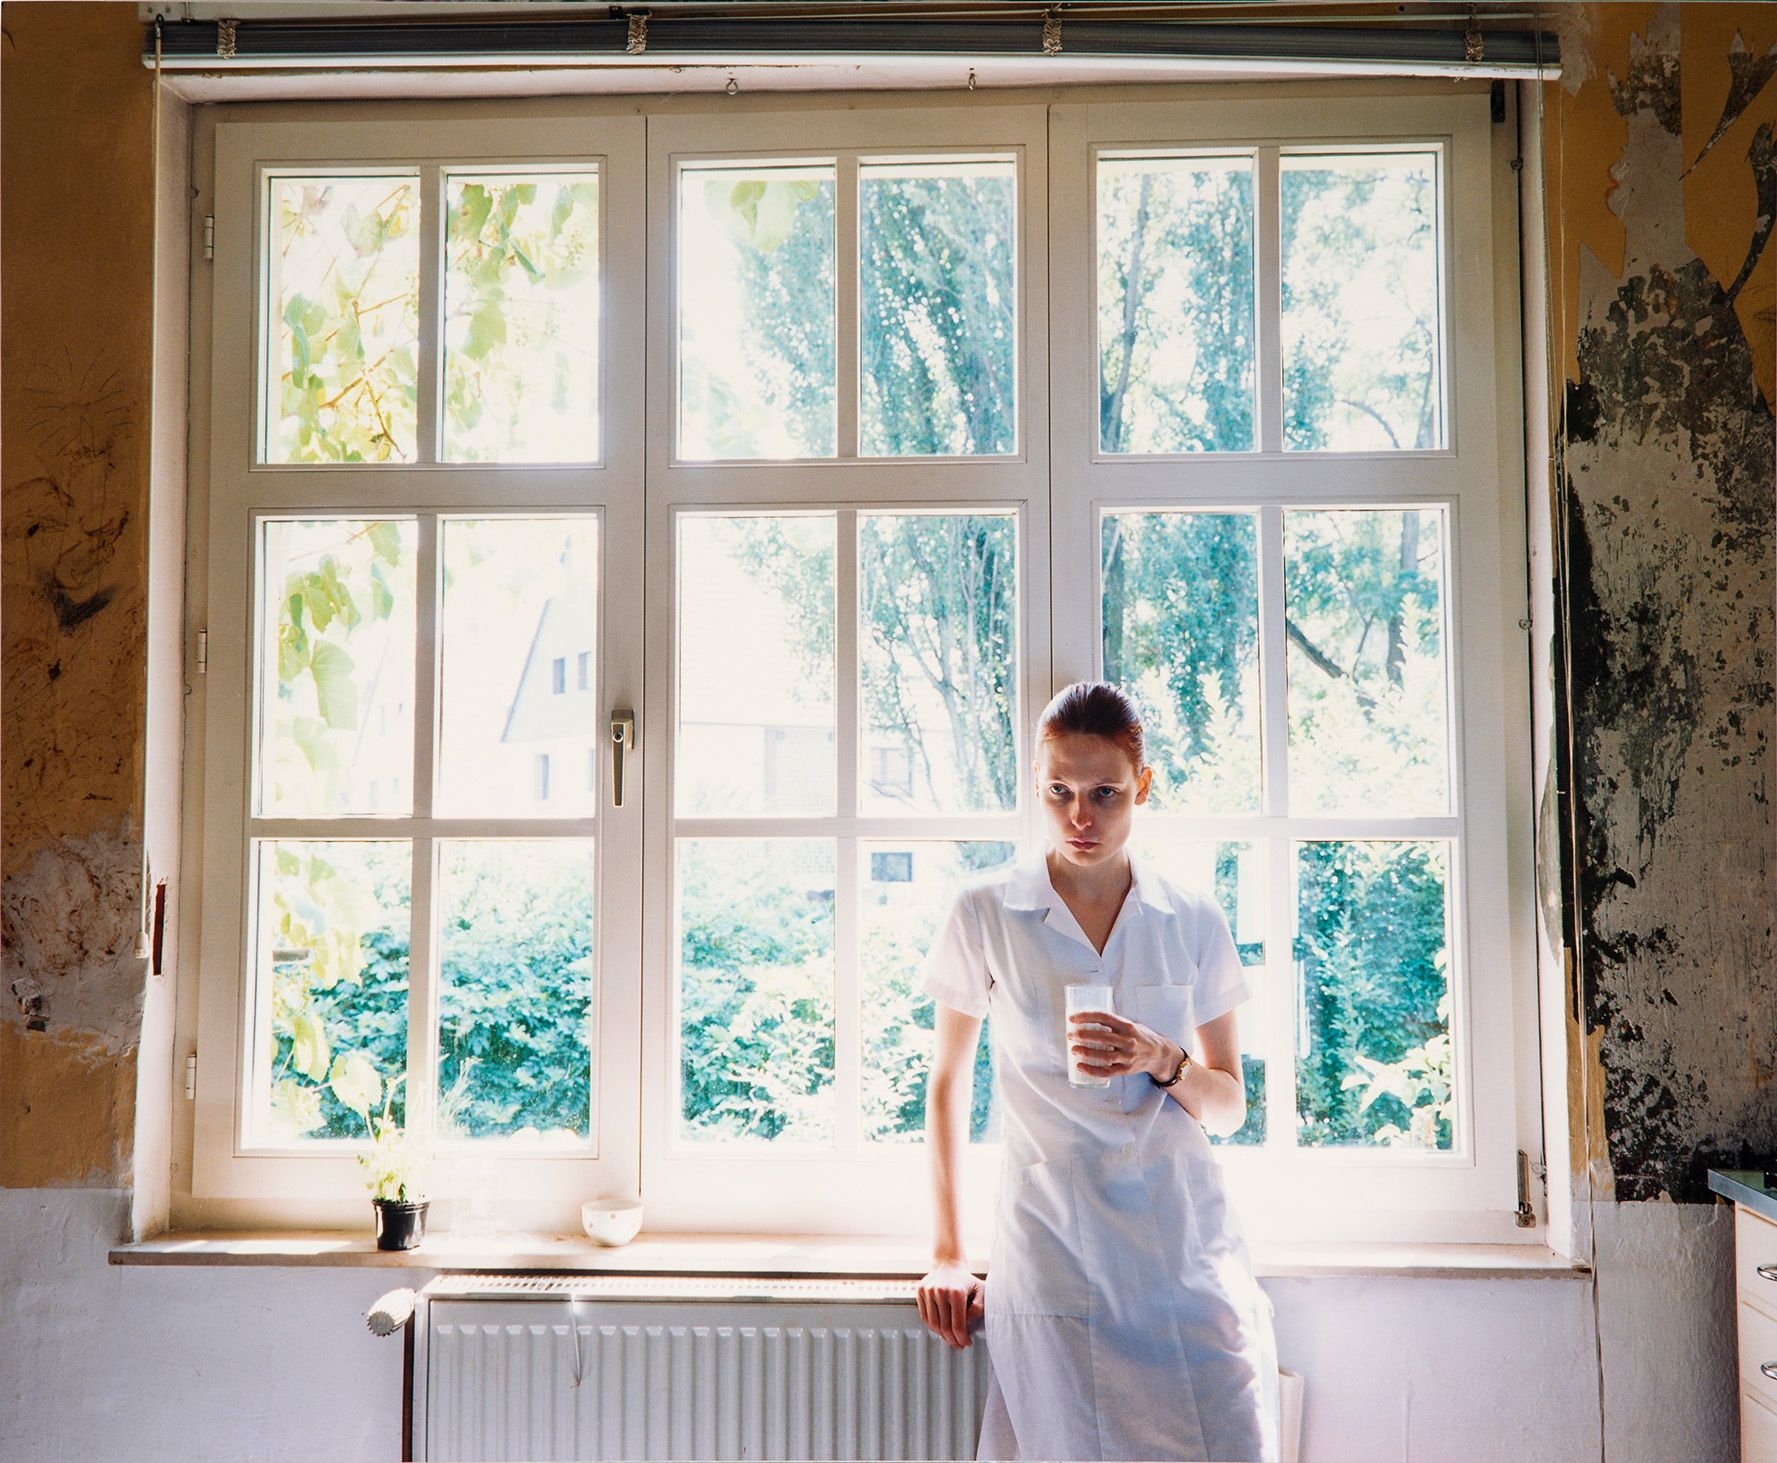 Untitled (Woman in front of window) by Aino Kannisto, 1999